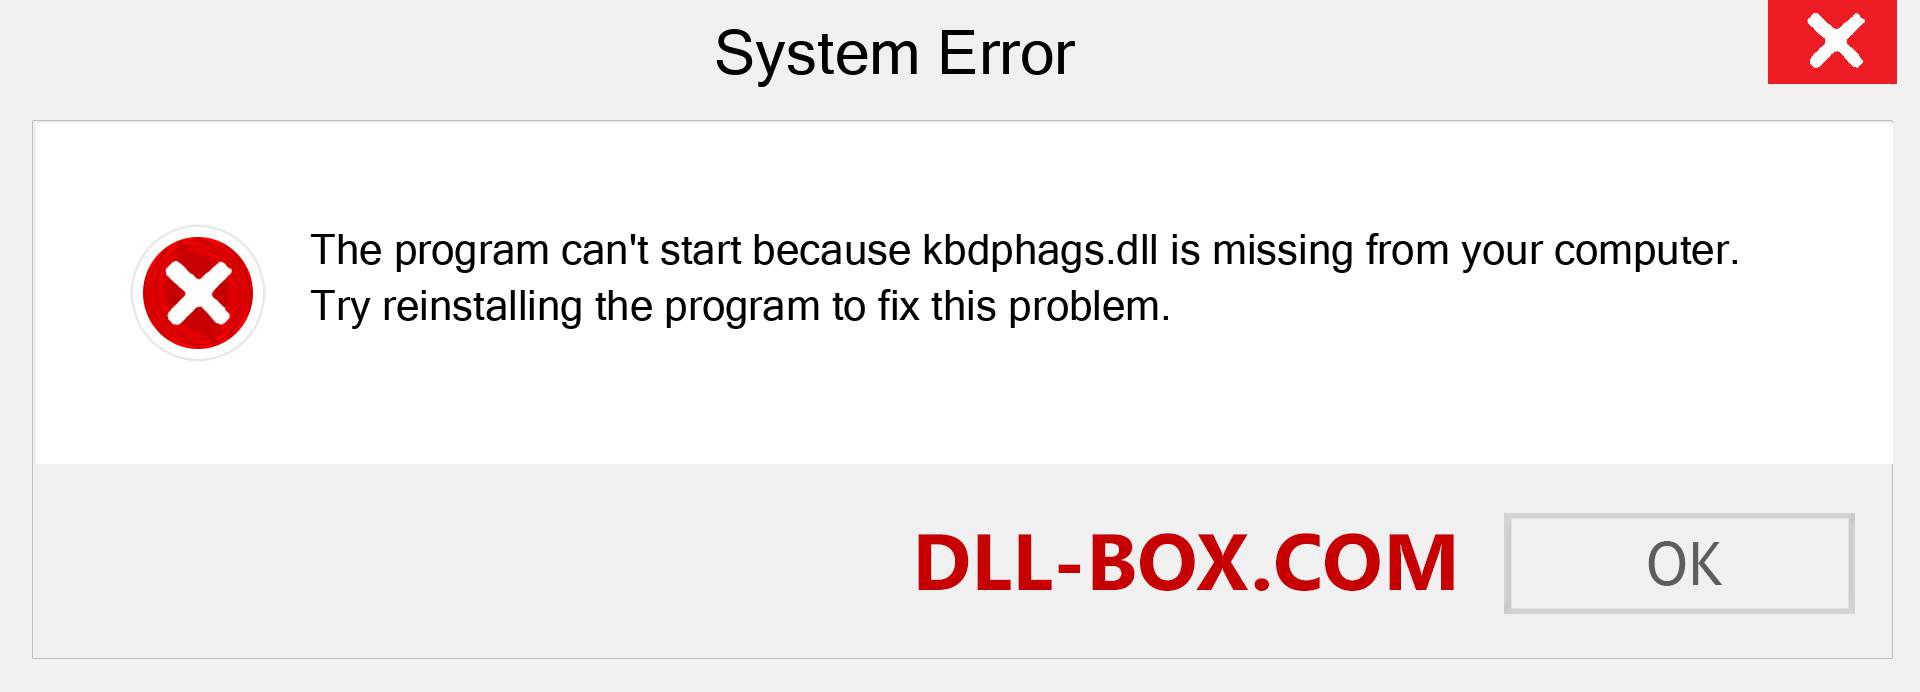  kbdphags.dll file is missing?. Download for Windows 7, 8, 10 - Fix  kbdphags dll Missing Error on Windows, photos, images